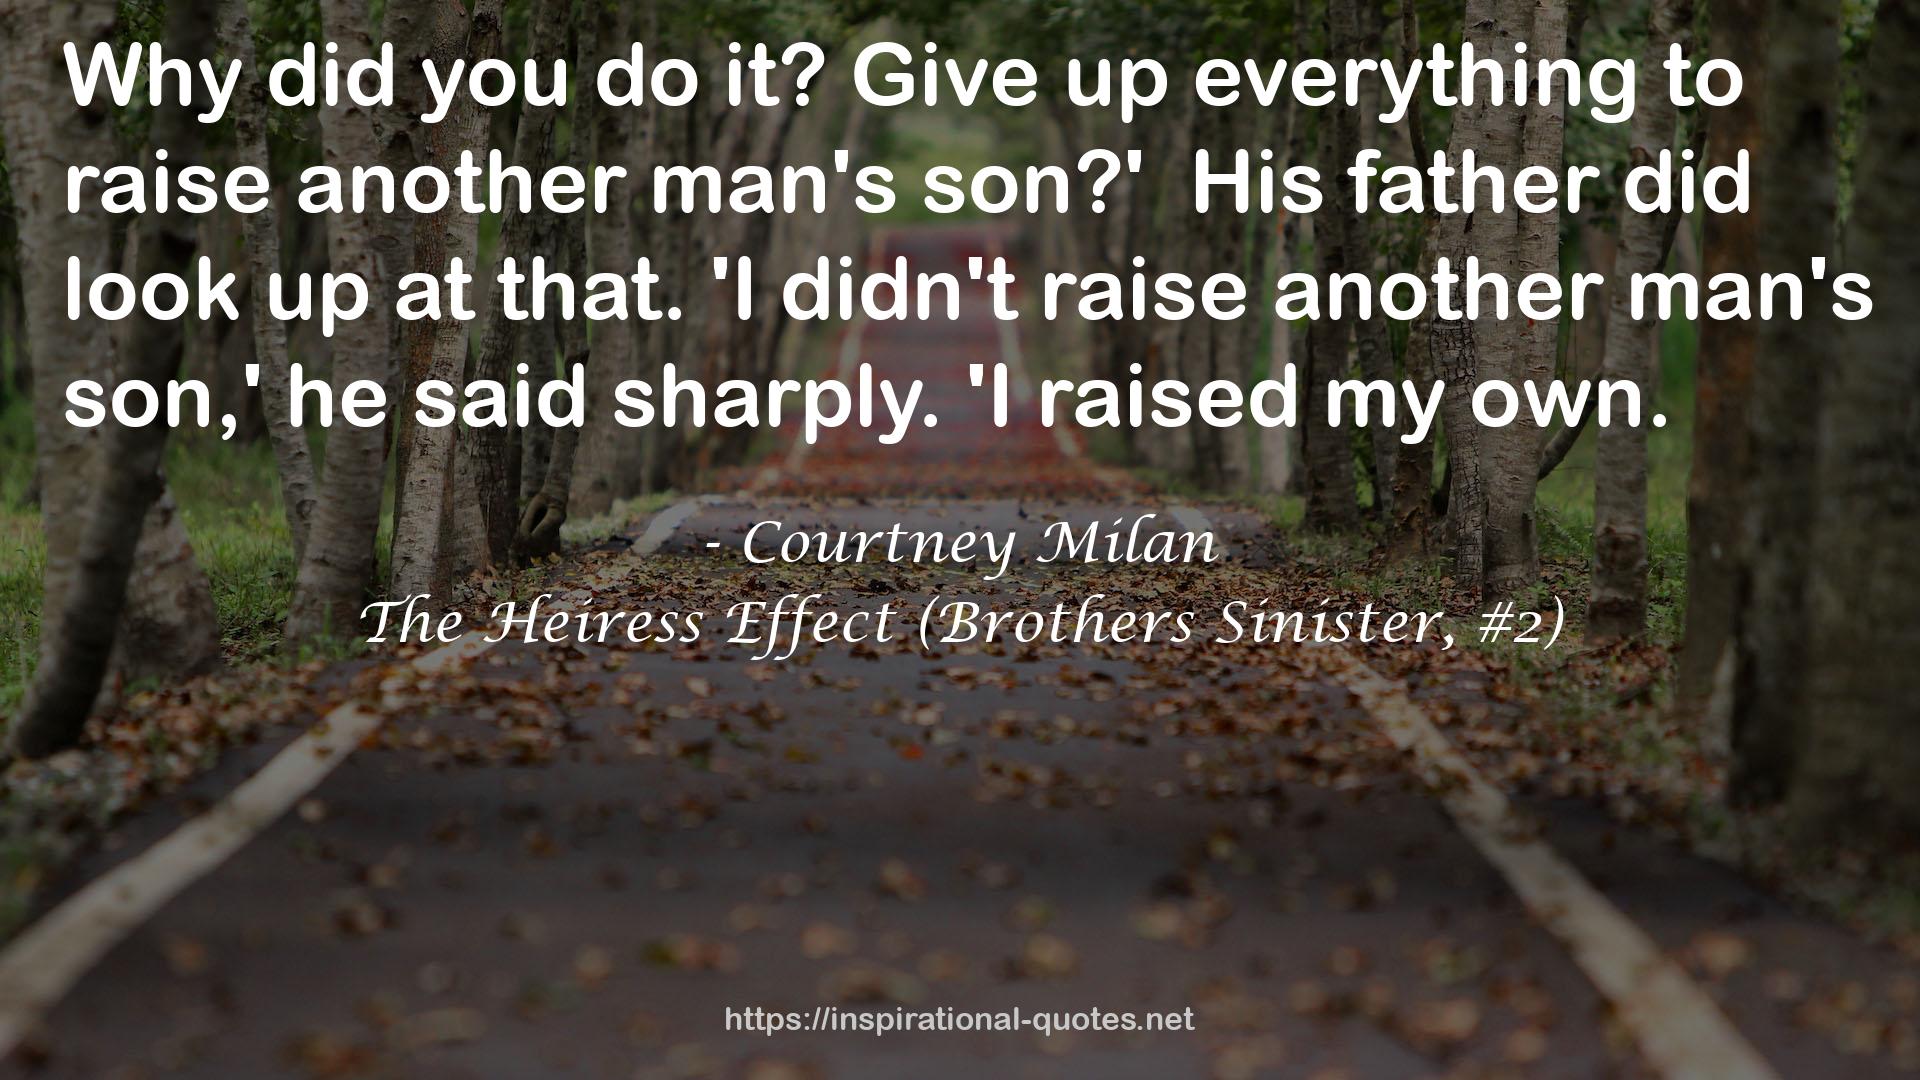 The Heiress Effect (Brothers Sinister, #2) QUOTES